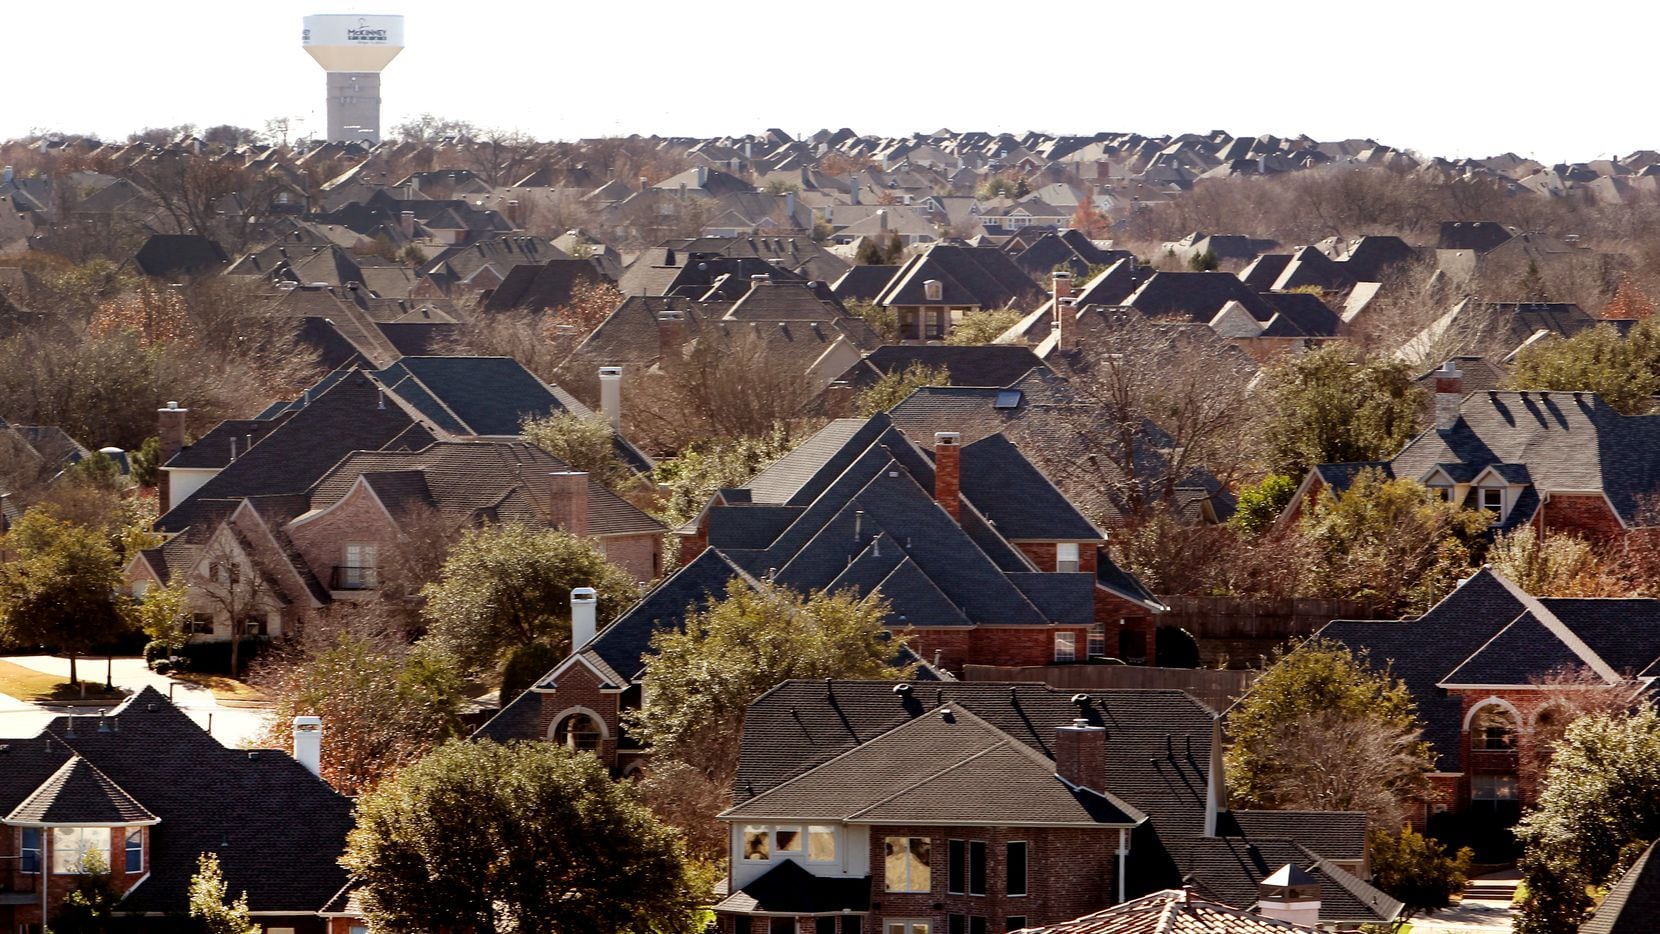 A McKinney water tower rises in the background over a sea of suburban rooftops of subdivisions in McKinney.